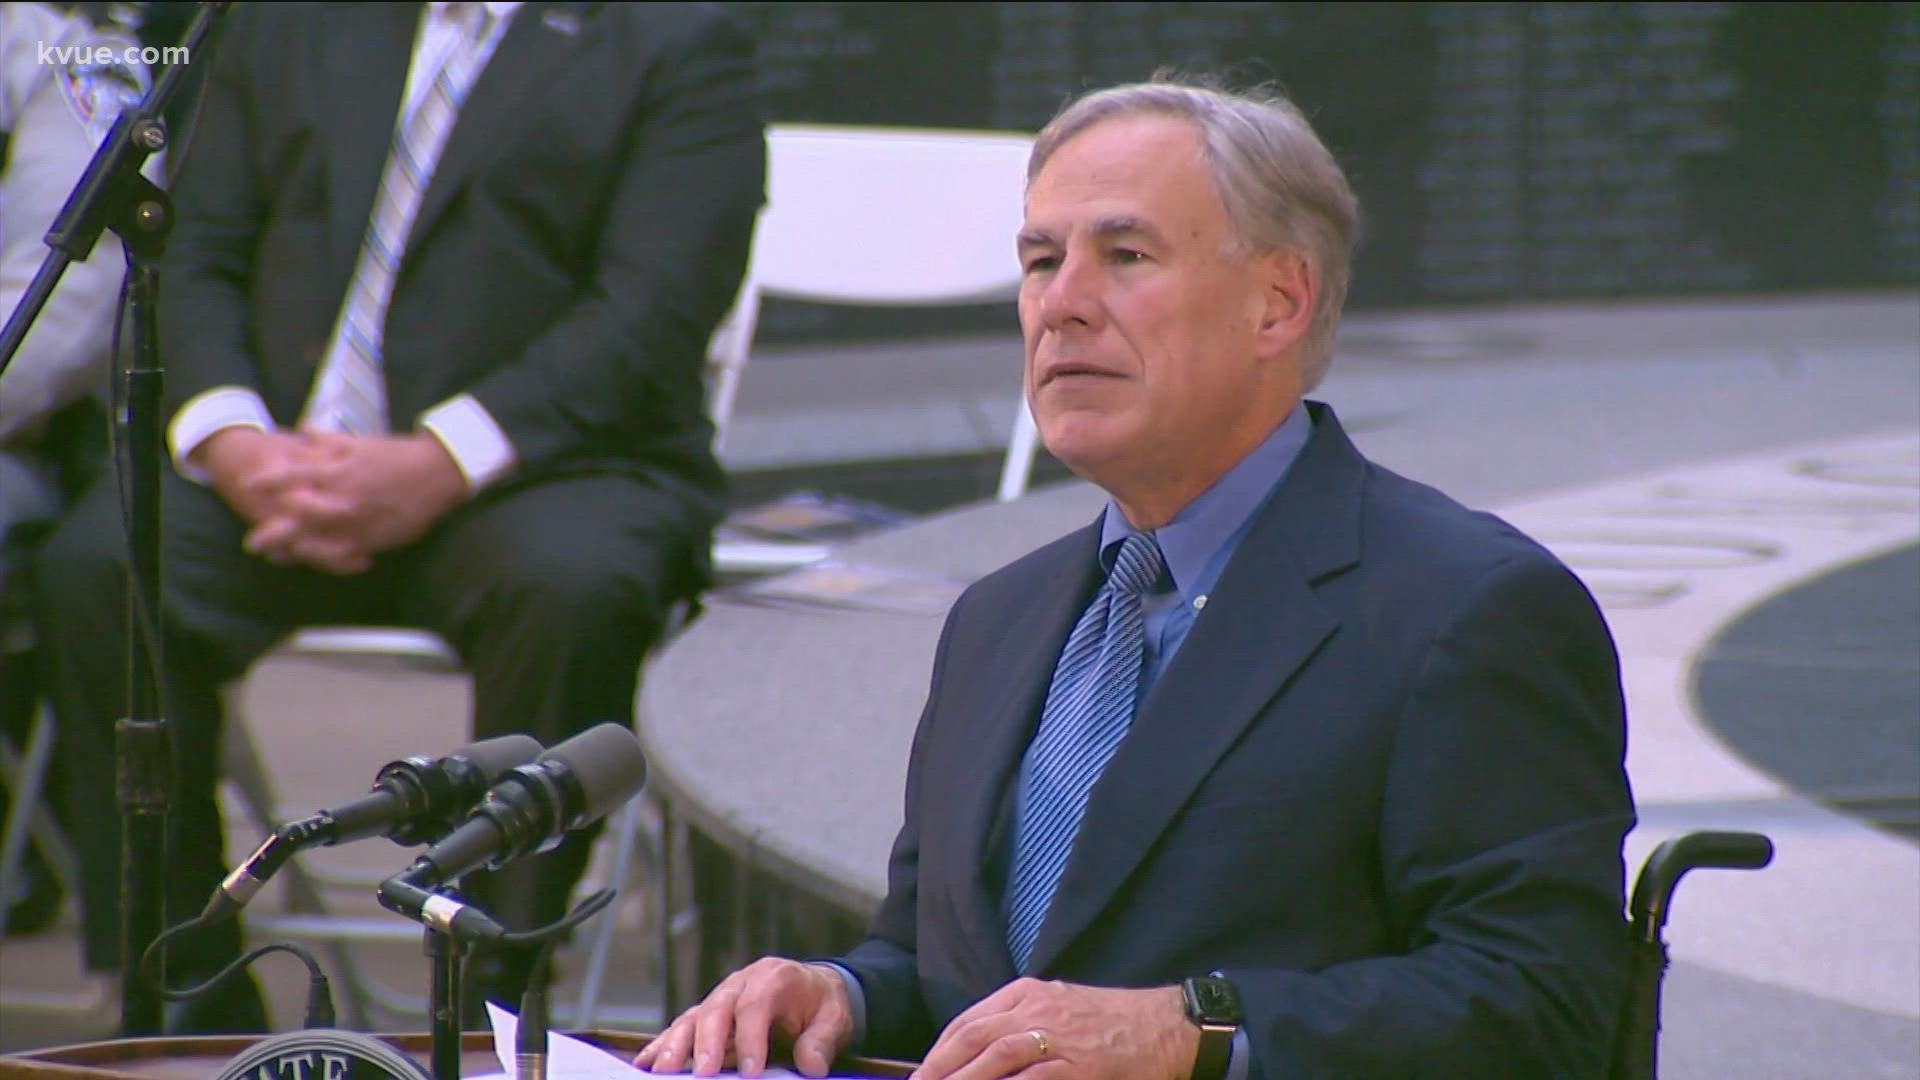 Gov. Abbott awarded a medal of honor to a family member of each of the 62 officers being recognized.